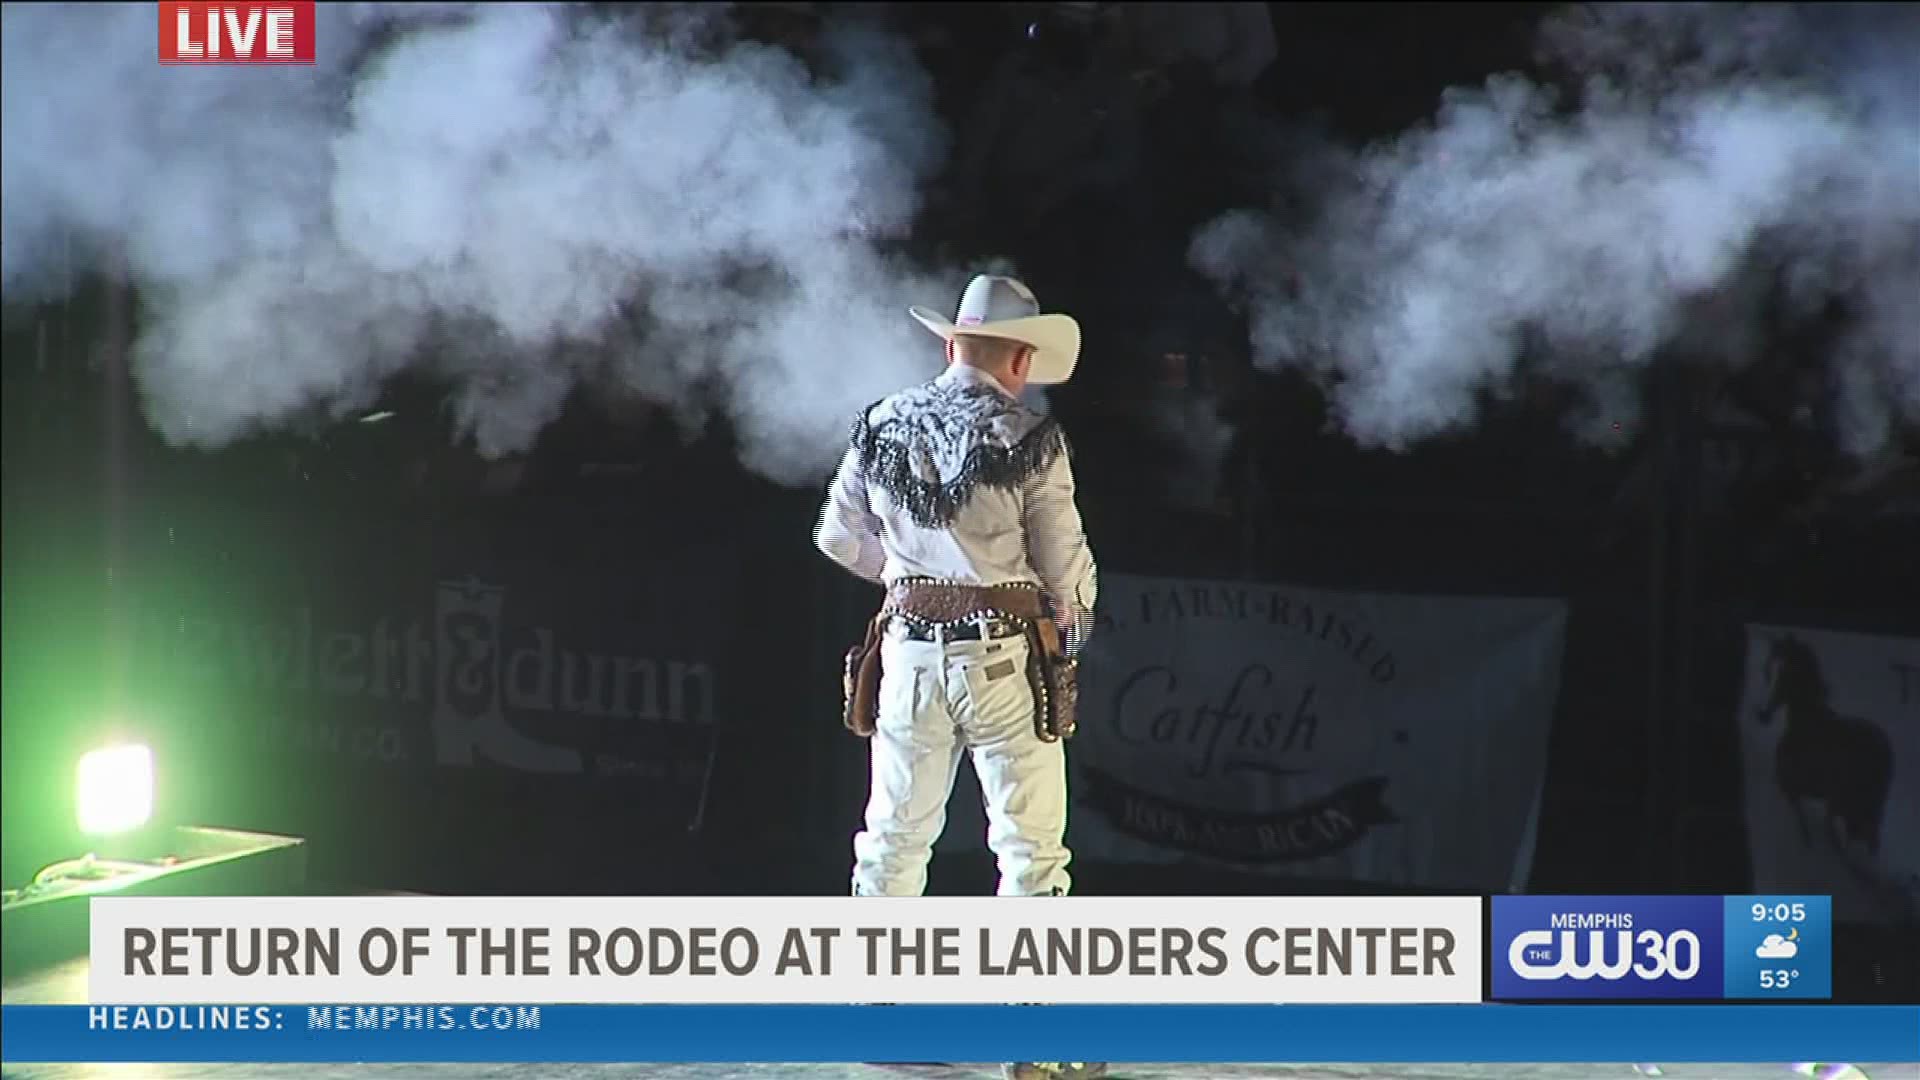 Rodeo at the Landers Center